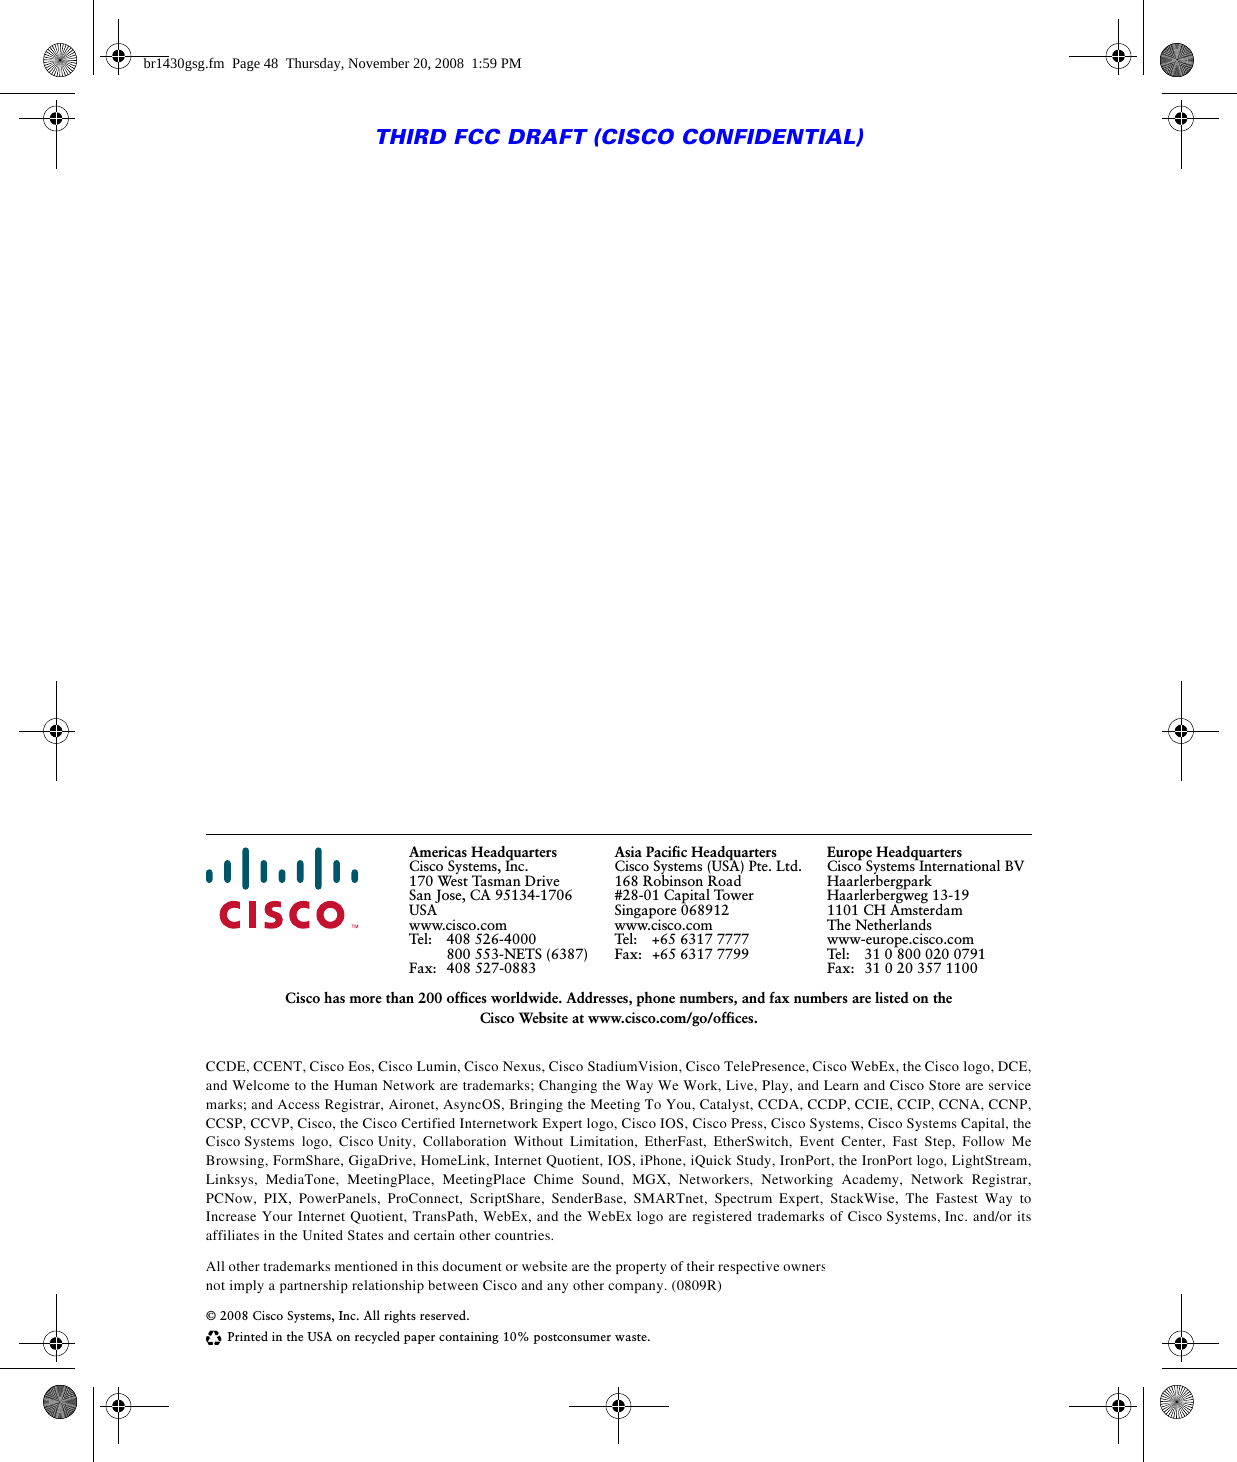 Americas HeadquartersCisco Systems, Inc.170 West Tasman DriveSan Jose, CA 95134-1706USAwww.cisco.comTel: 408 526-4000800 553-NETS (6387)Fax: 408 527-0883Asia Pacific HeadquartersCisco Systems (USA) Pte. Ltd.168 Robinson Road#28-01 Capital TowerSingapore 068912www.cisco.comTel: +65 6317 7777Fax: +65 6317 7799Europe HeadquartersCisco Systems International BVHaarlerbergparkHaarlerbergweg 13-191101 CH AmsterdamThe Netherlandswww-europe.cisco.comTel: 31 0 800 020 0791Fax: 31 0 20 357 1100Cisco has more than 200 offices worldwide. Addresses, phone numbers, and fax numbers are listed on the Cisco Website at www.cisco.com/go/offices.CCDE, CCENT, Cisco Eos, Cisco Lumin, Cisco Nexus, Cisco StadiumVision, Cisco TelePresence, Cisco WebEx, the Cisco logo, DCE, and Welcome to the Human Network are trademarks; Changing the Way We Work, Live, Play, and Learn and Cisco Store are service marks; and Access Registrar, Aironet, AsyncOS, Bringing the Meeting To You, Catalyst, CCDA, CCDP, CCIE, CCIP, CCNA, CCNP, CCSP, CCVP, Cisco, the Cisco Certified Internetwork Expert logo, Cisco IOS, Cisco Press, Cisco Systems, Cisco Systems Capital, the Cisco Systems logo, Cisco Unity, Collaboration Without Limitation, EtherFast, EtherSwitch, Event Center, Fast Step, Follow Me Browsing, FormShare, GigaDrive, HomeLink, Internet Quotient, IOS, iPhone, iQuick Study, IronPort, the IronPort logo, LightStream, Linksys, MediaTone, MeetingPlace, MeetingPlace Chime Sound, MGX, Networkers, Networking Academy, Network Registrar, PCNow, PIX, PowerPanels, ProConnect, ScriptShare, SenderBase, SMARTnet, Spectrum Expert, StackWise, The Fastest Way to Increase Your Internet Quotient, TransPath, WebEx, and the WebEx logo are registered trademarks of Cisco Systems, Inc. and/or its affiliates in the United States and certain other countries. All other trademarks mentioned in this document or website are the property of their respective owners. The use of the word partner does not imply a partnership relationship between Cisco and any other company. (0809R)© 2008 Cisco Systems, Inc. All rights reserved.Printed in the USA on recycled paper containing 10% postconsumer waste.THIRD FCC DRAFT (CISCO CONFIDENTIAL)br1430gsg.fm  Page 48  Thursday, November 20, 2008  1:59 PM